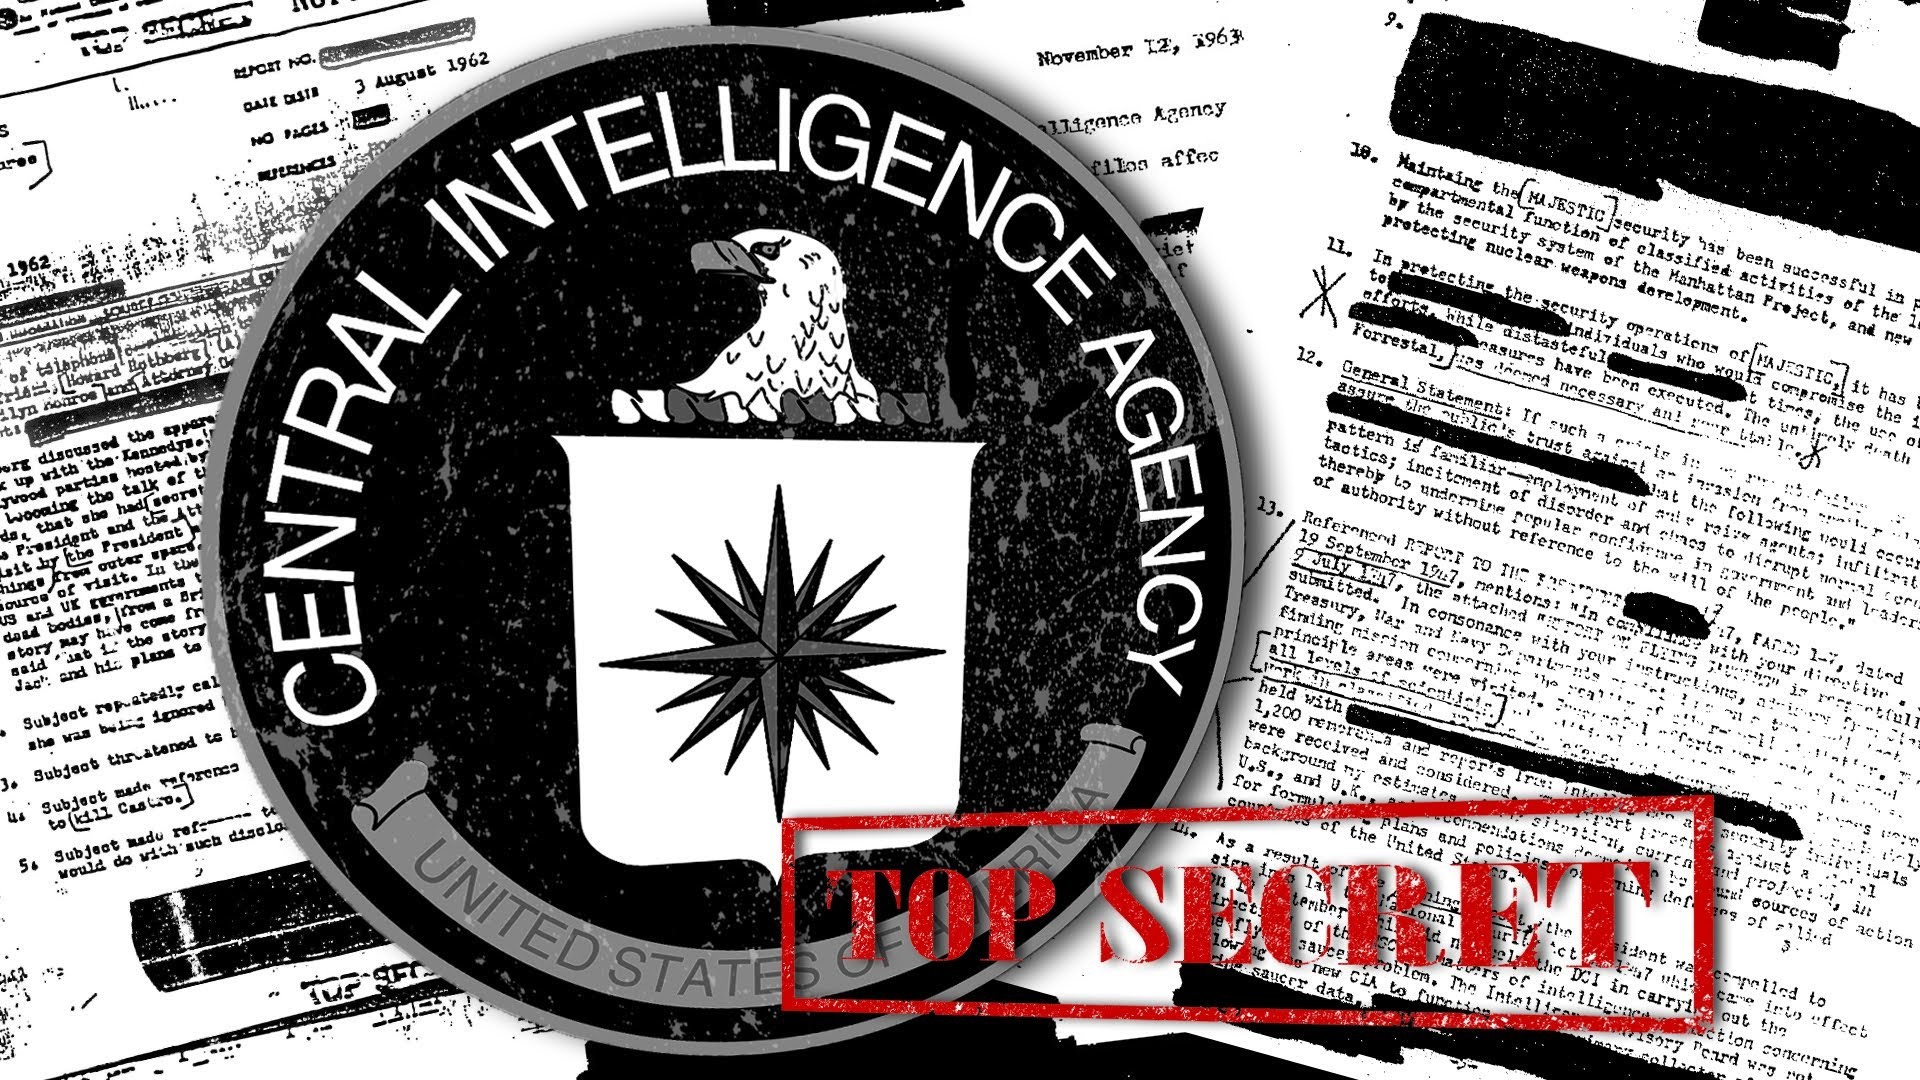 CIA MKULTRA Collection